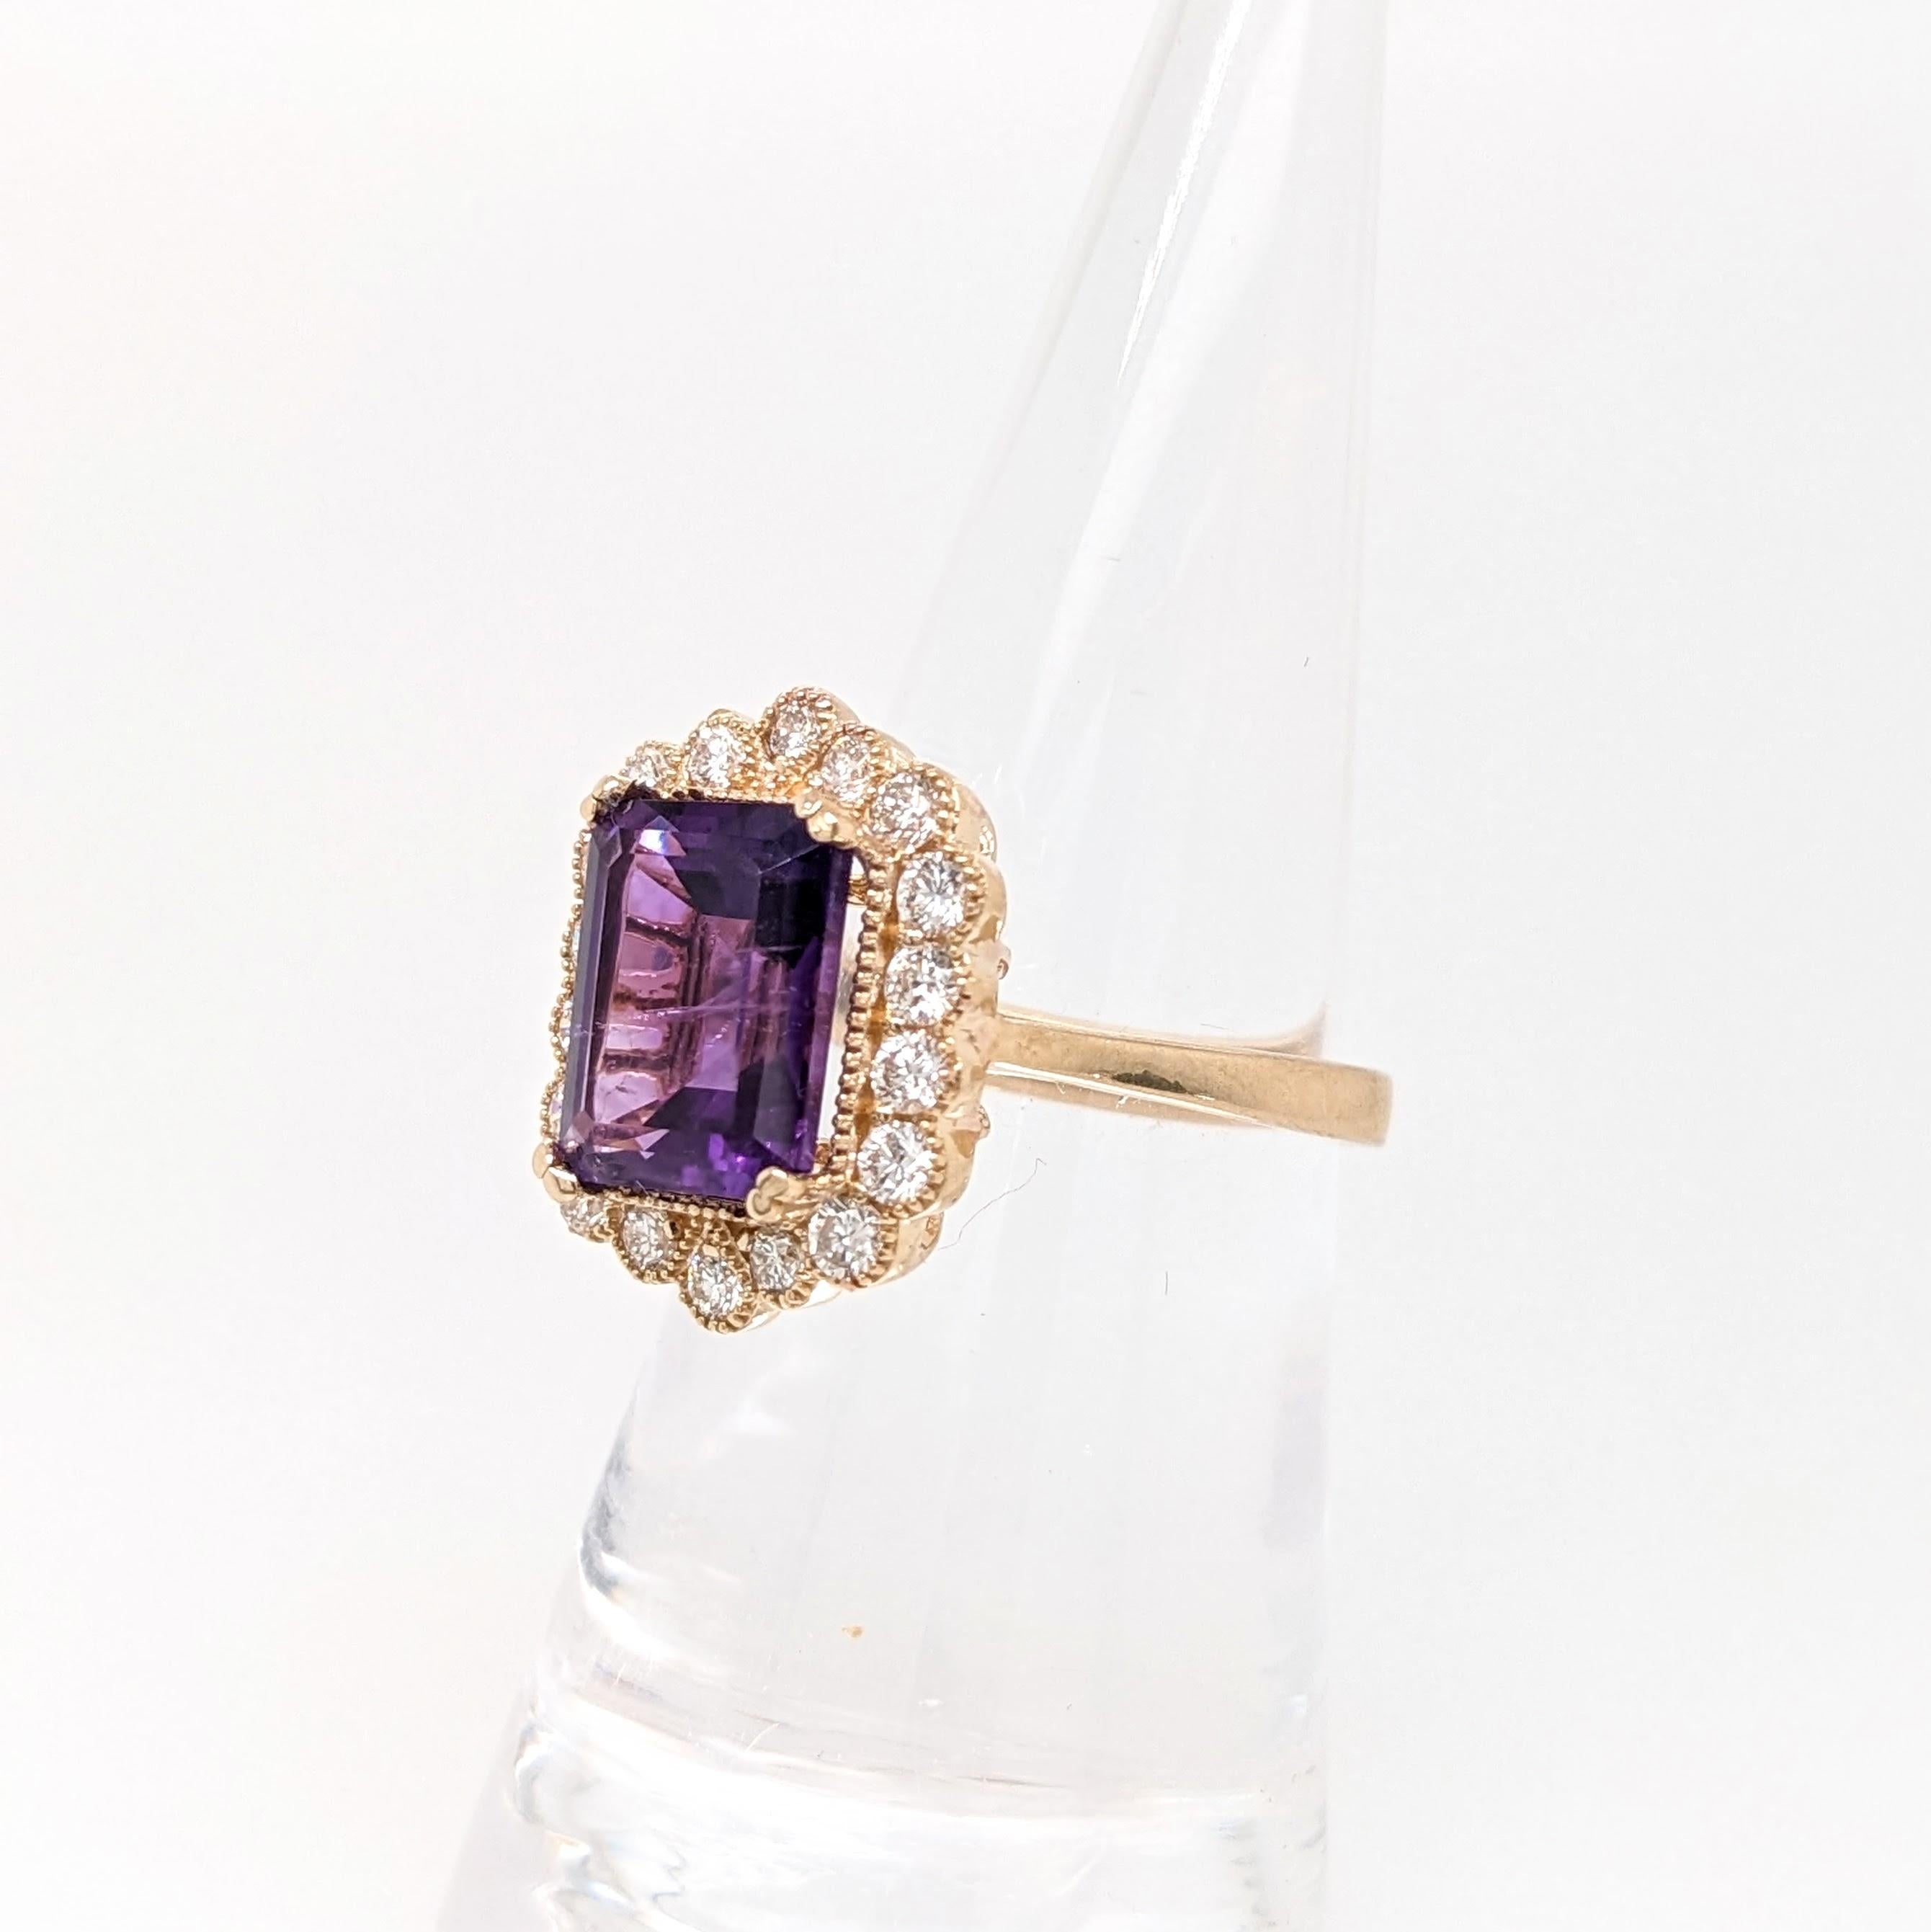 Emerald Cut 3.1ct Amethyst Ring w Earth Mined Diamonds in Solid 14K Yellow Gold EM 11x8mm For Sale